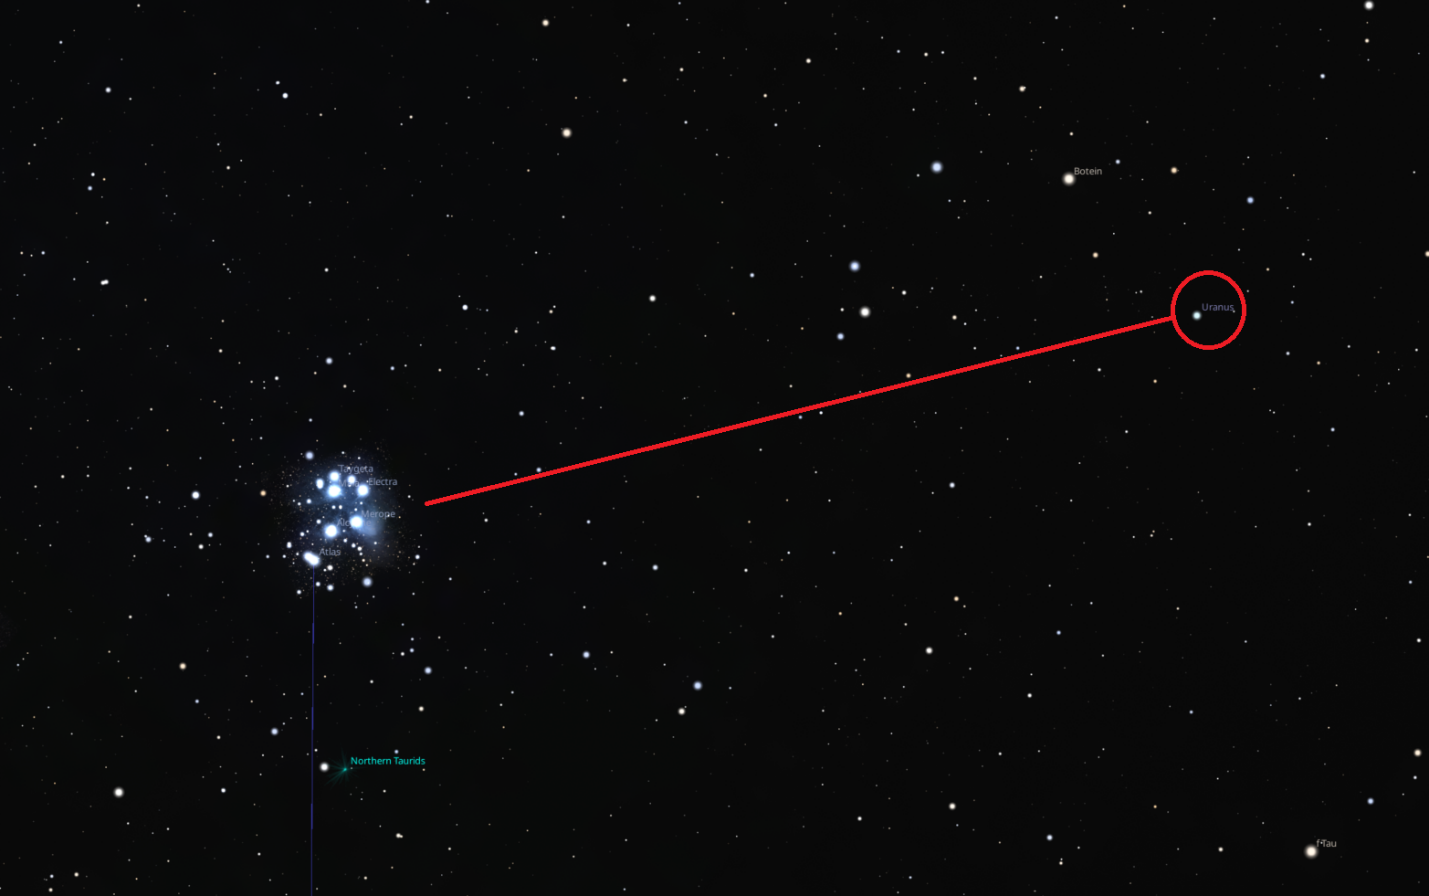 A star map showing The Pleiades and Uranus. A red line is linked between showing the distance between the two objects, with Uranus circled in red